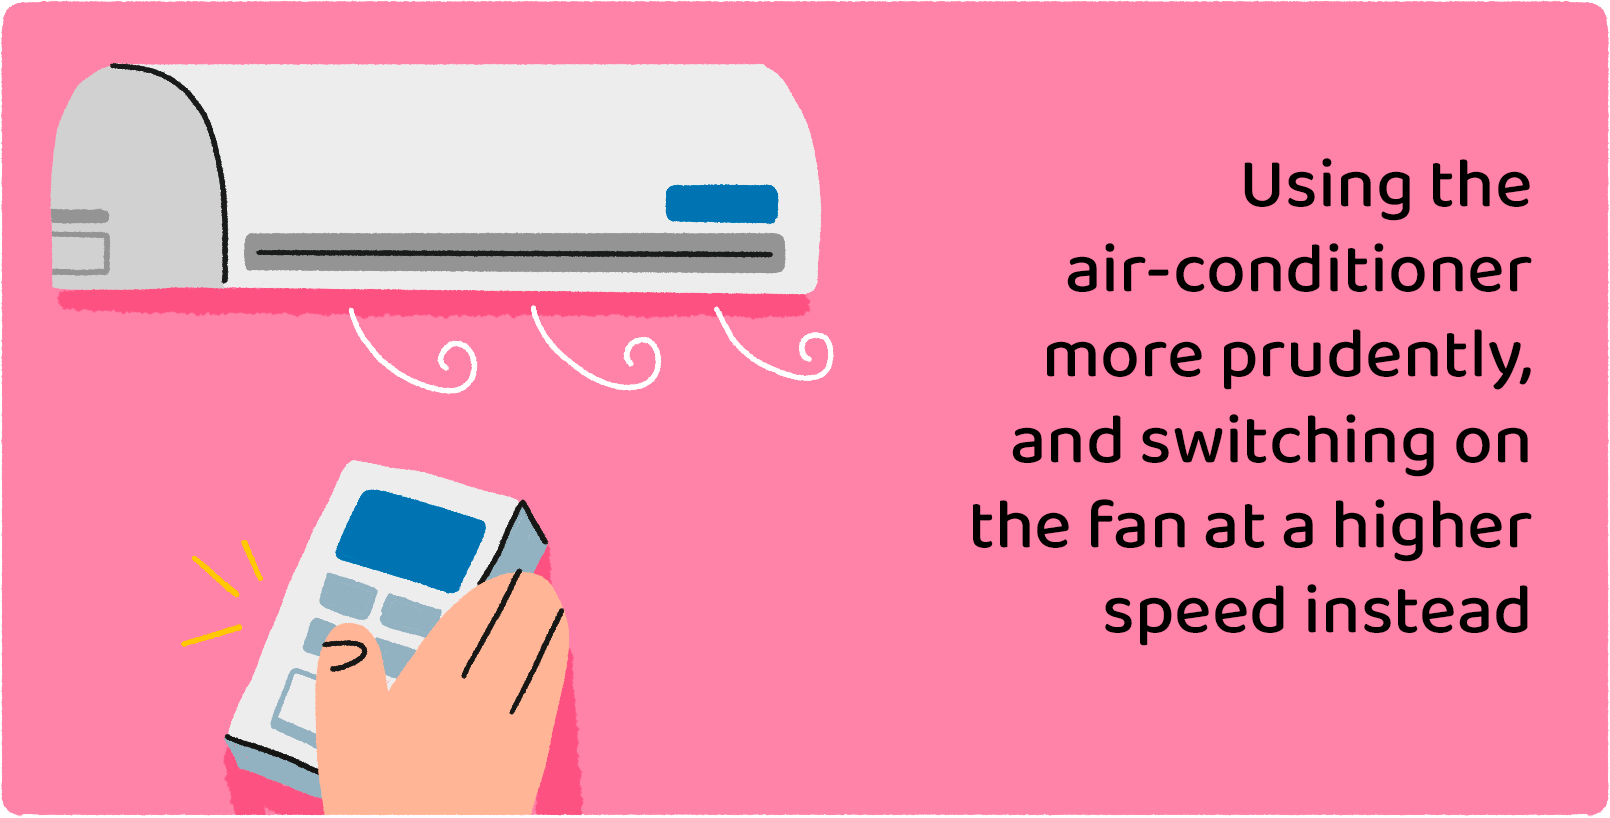 Using the air-conditioner more prudently, and switching on the fan at a higher speed instead